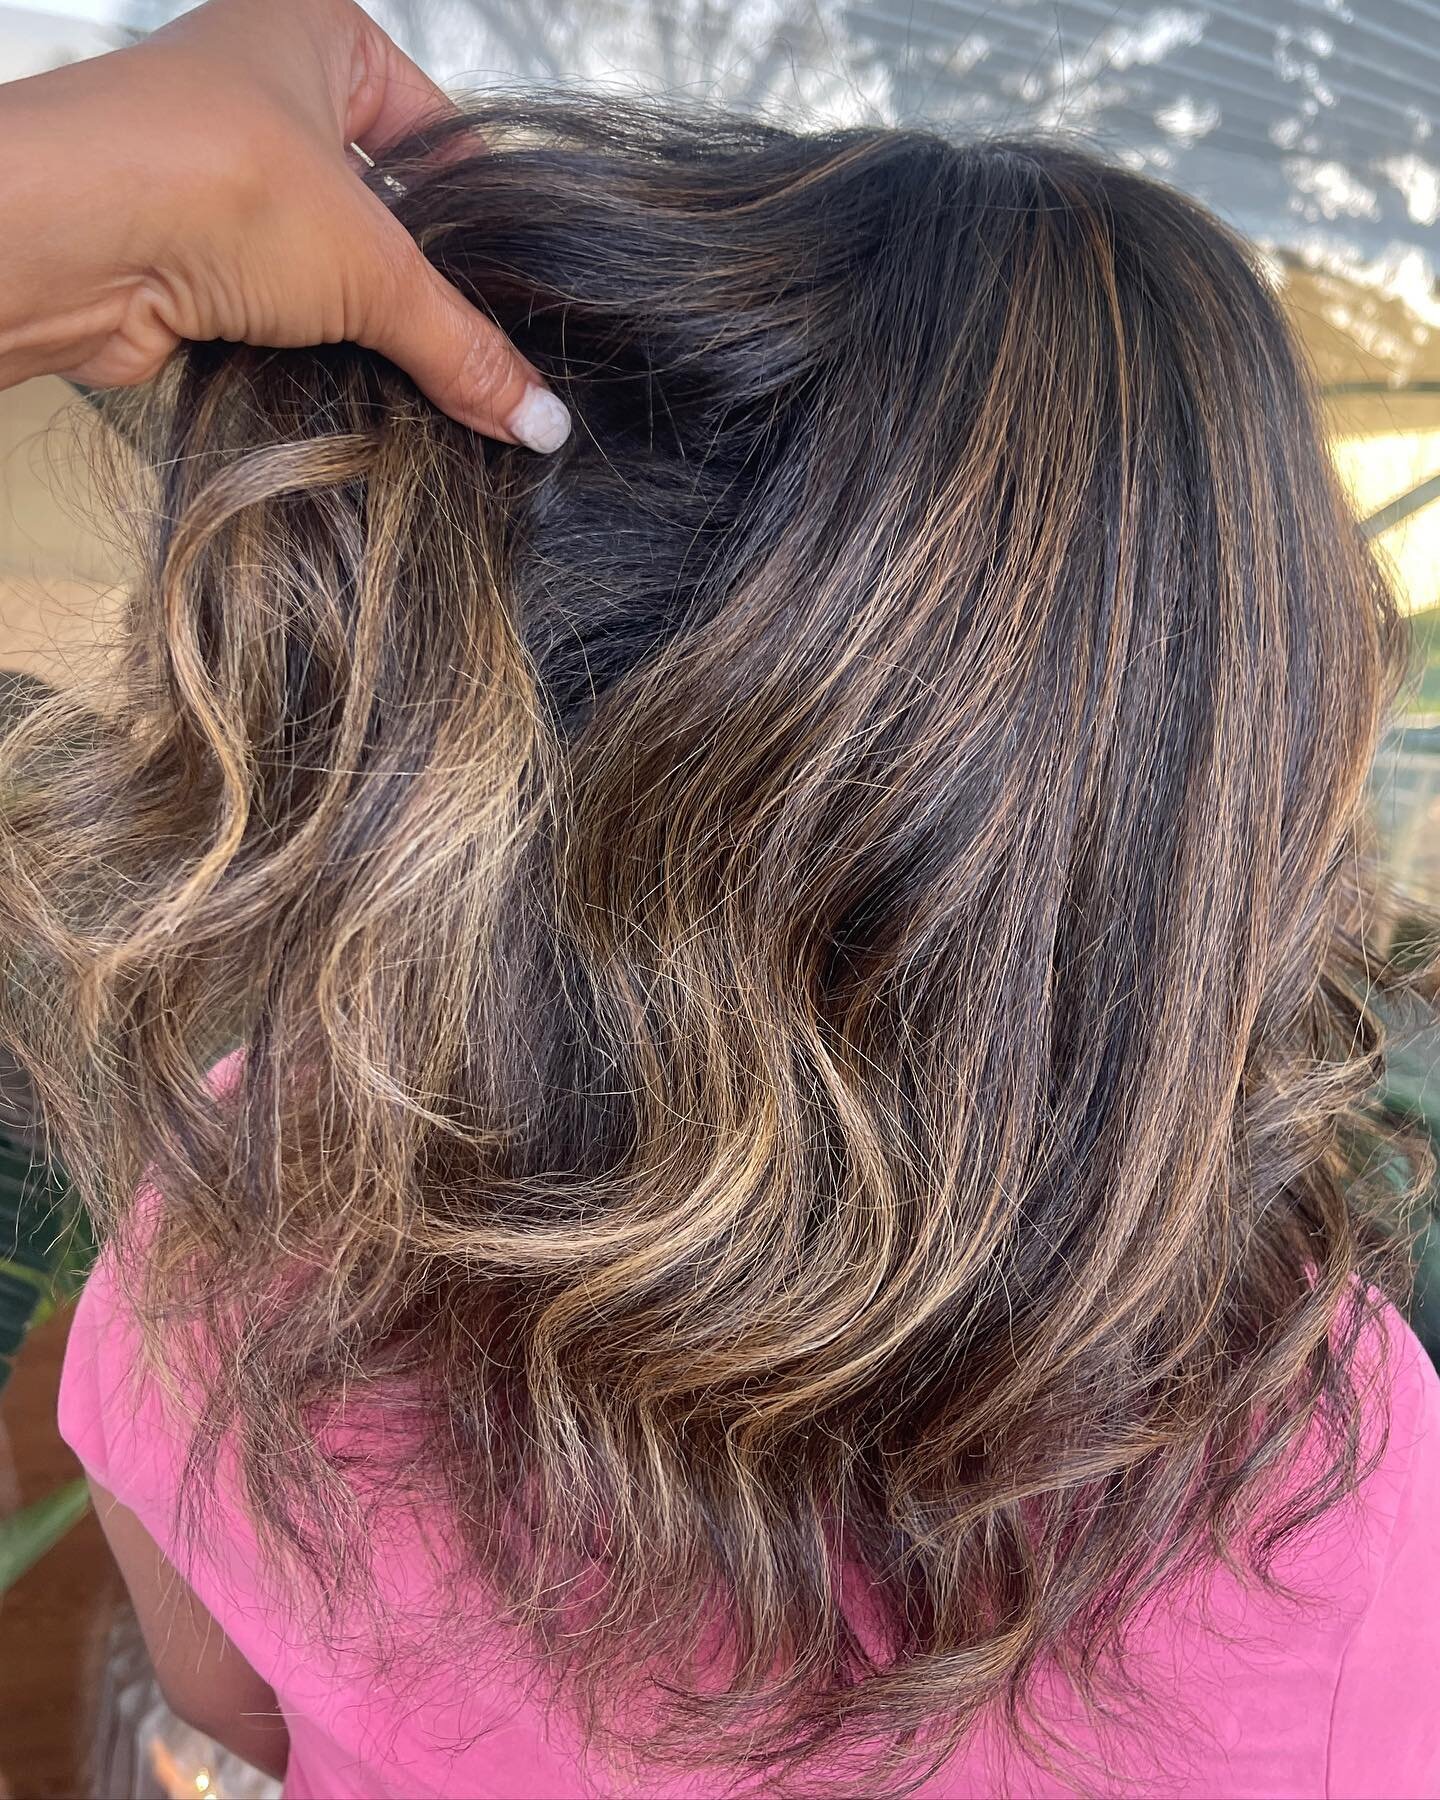 Textured hair color transformation #lomiibeauty#curlyhairbalyage#hairgoals#inspohaircolor#style#silkpress